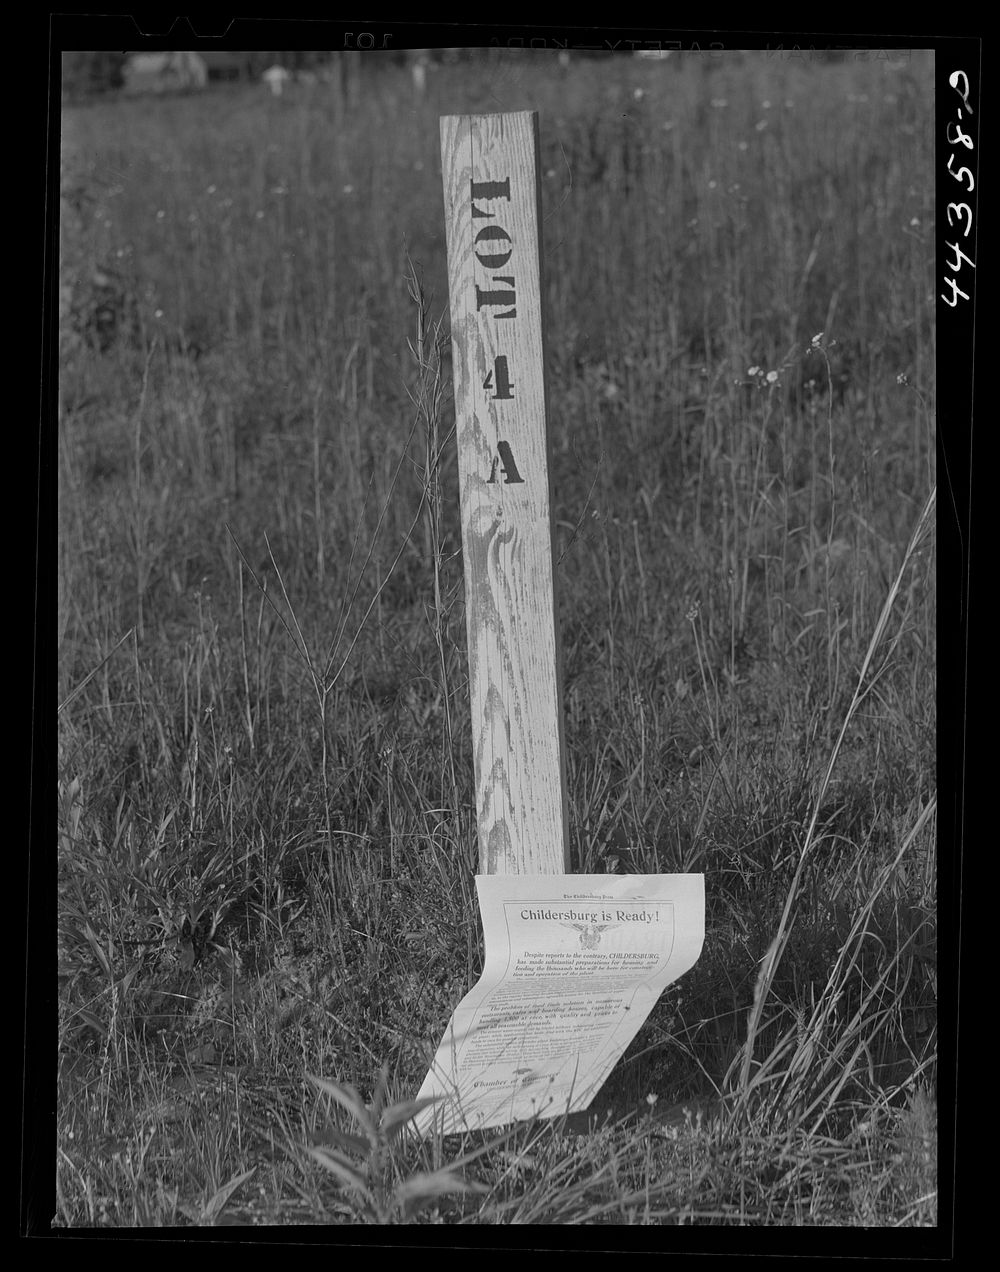 Stake marking off new lot in Childersburg, Alabama. Sourced from the Library of Congress.